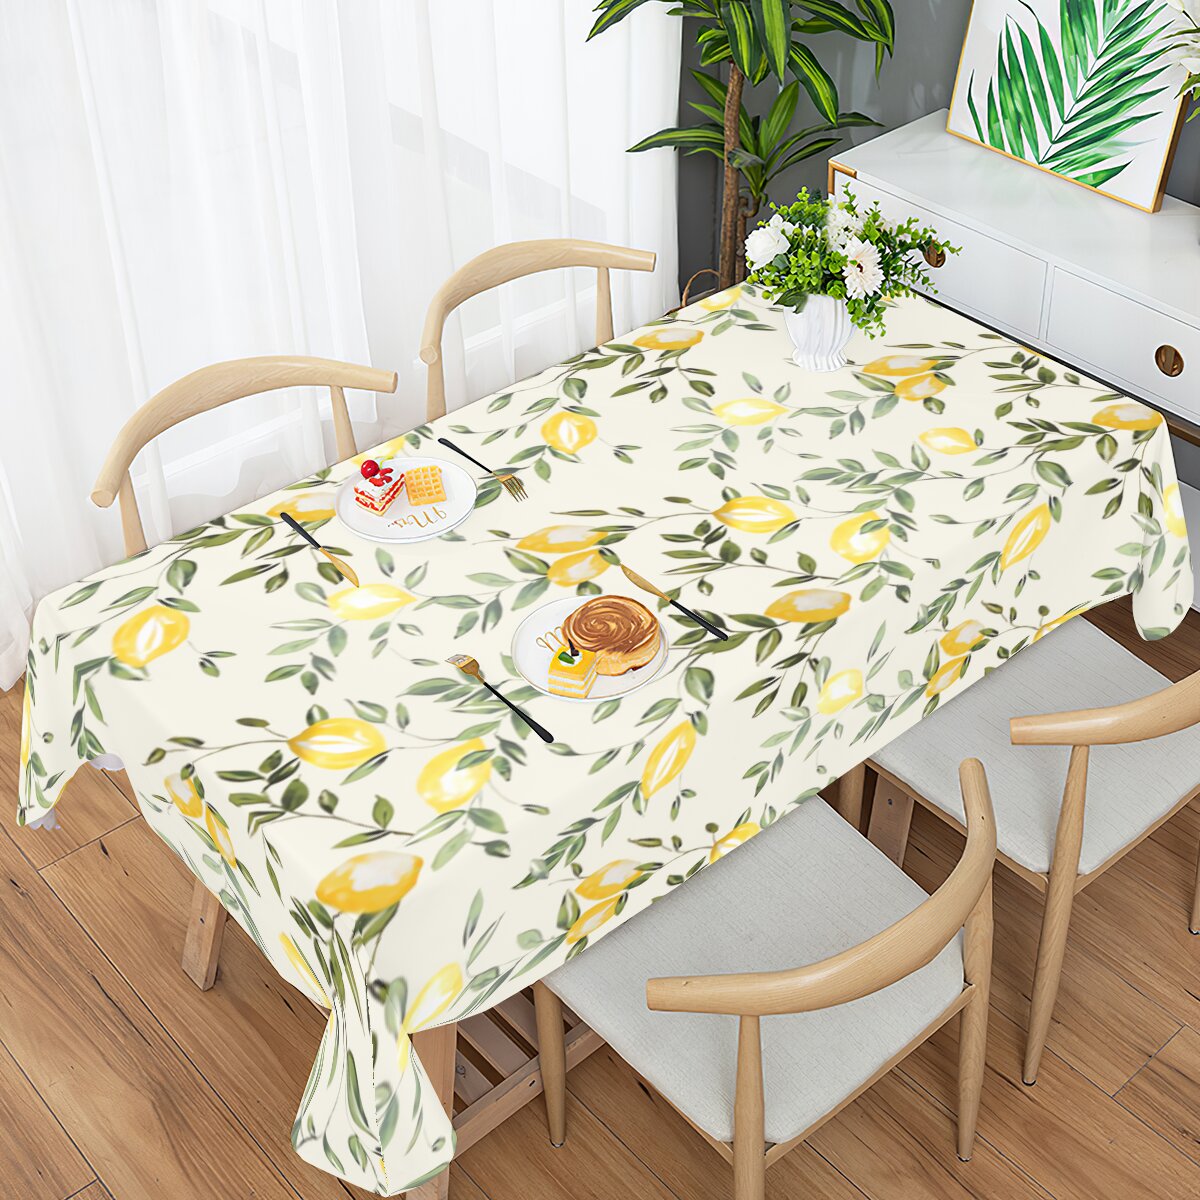 

1pc, Polyester Tablecloth, Lemon Pattern Table Cover, Pastoral Style Waterproof Oilproof Washable Table Cloth, Household Rectangular Tablecover, Kitchen Dining Table Decor, Room Decor